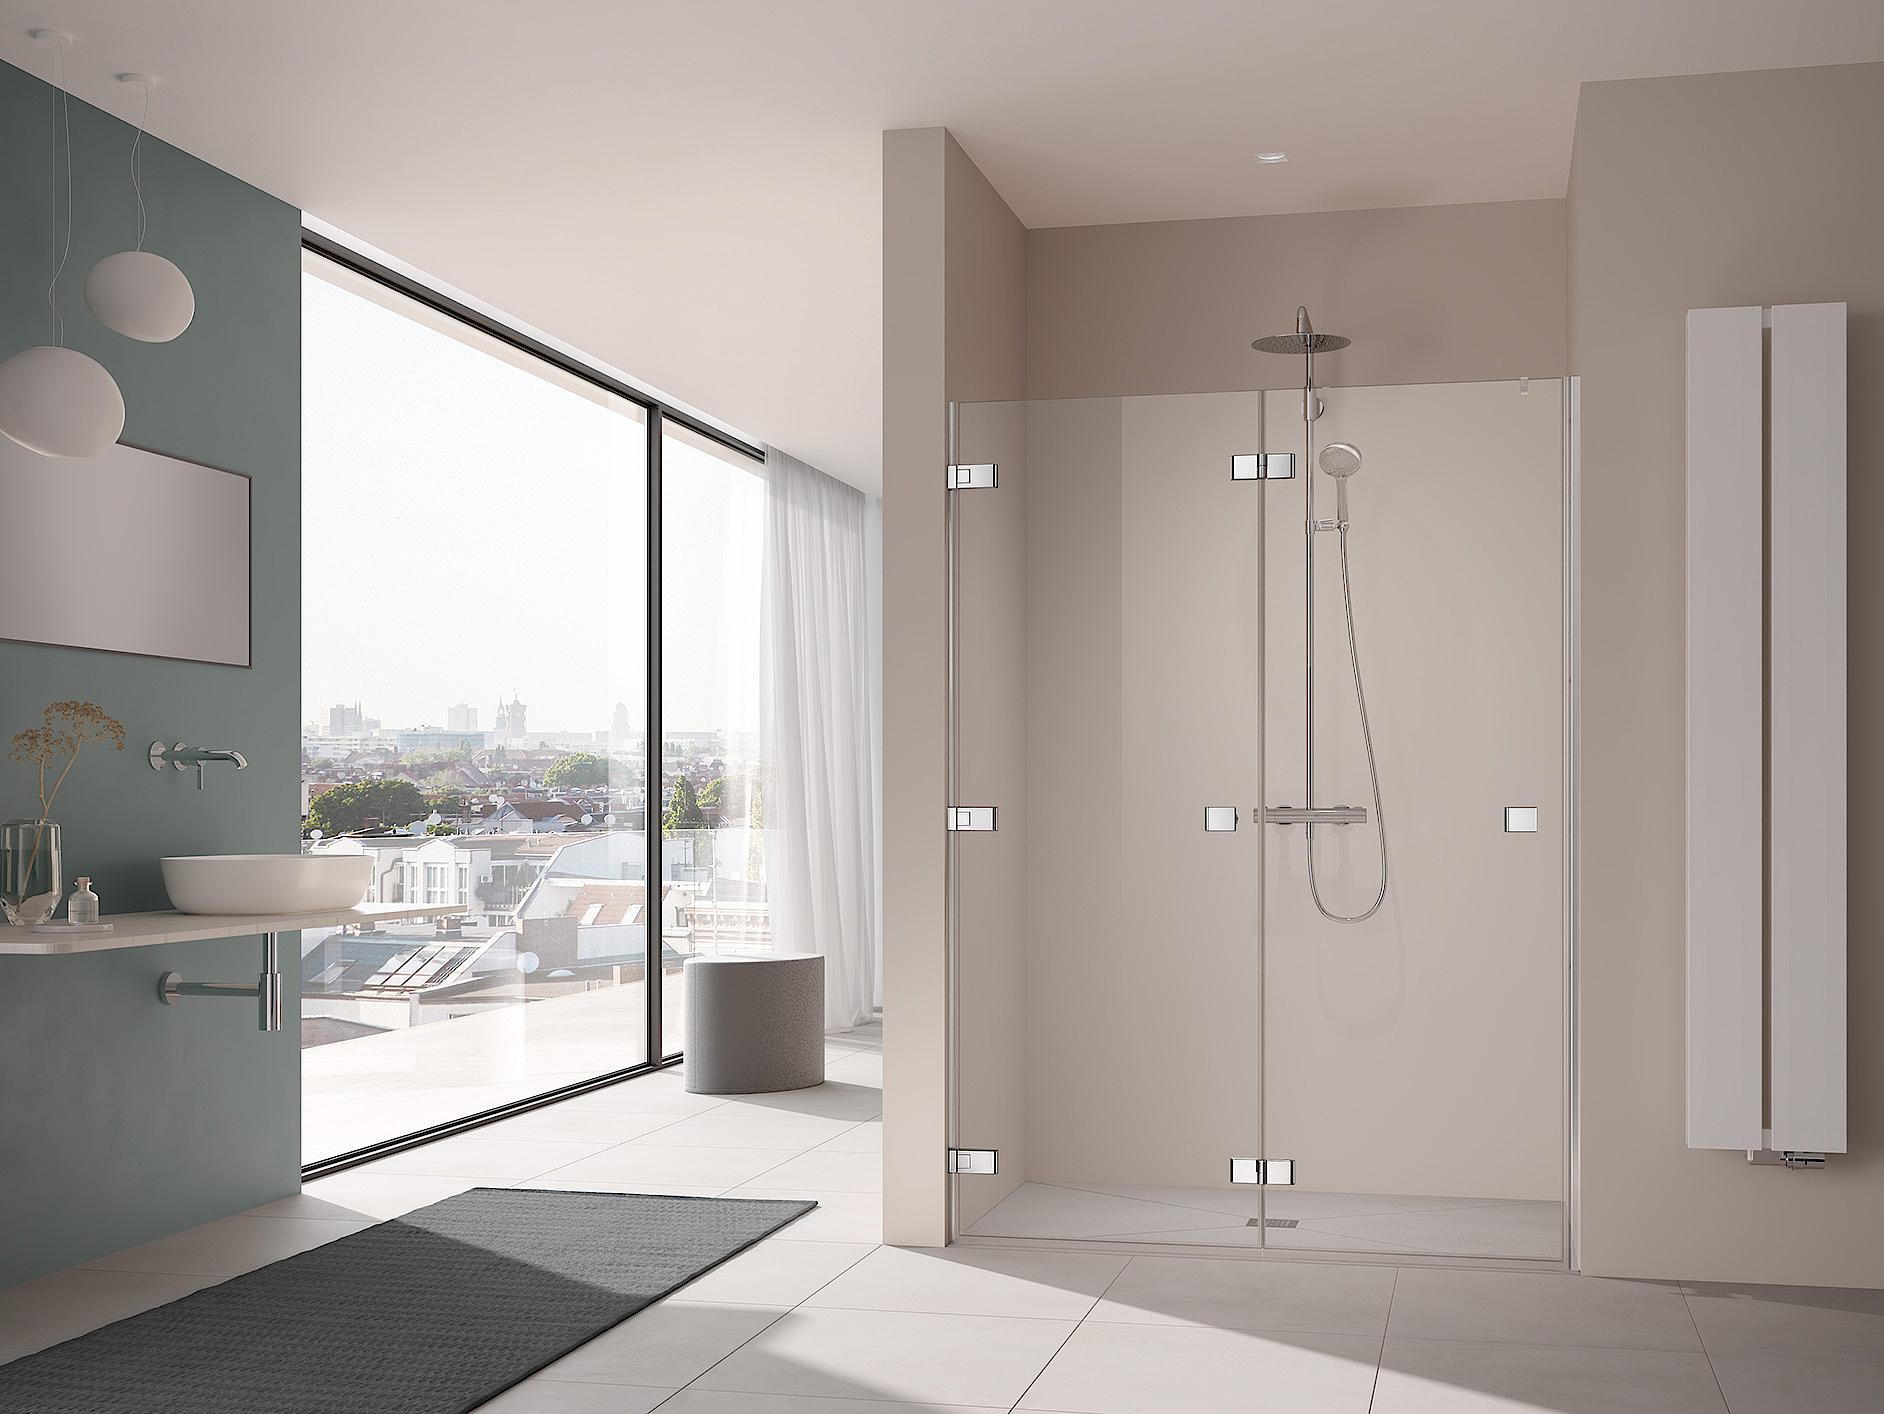 Kermi shower enclosure MENA single-panel folding door with 3rd wall hinge and additional handle